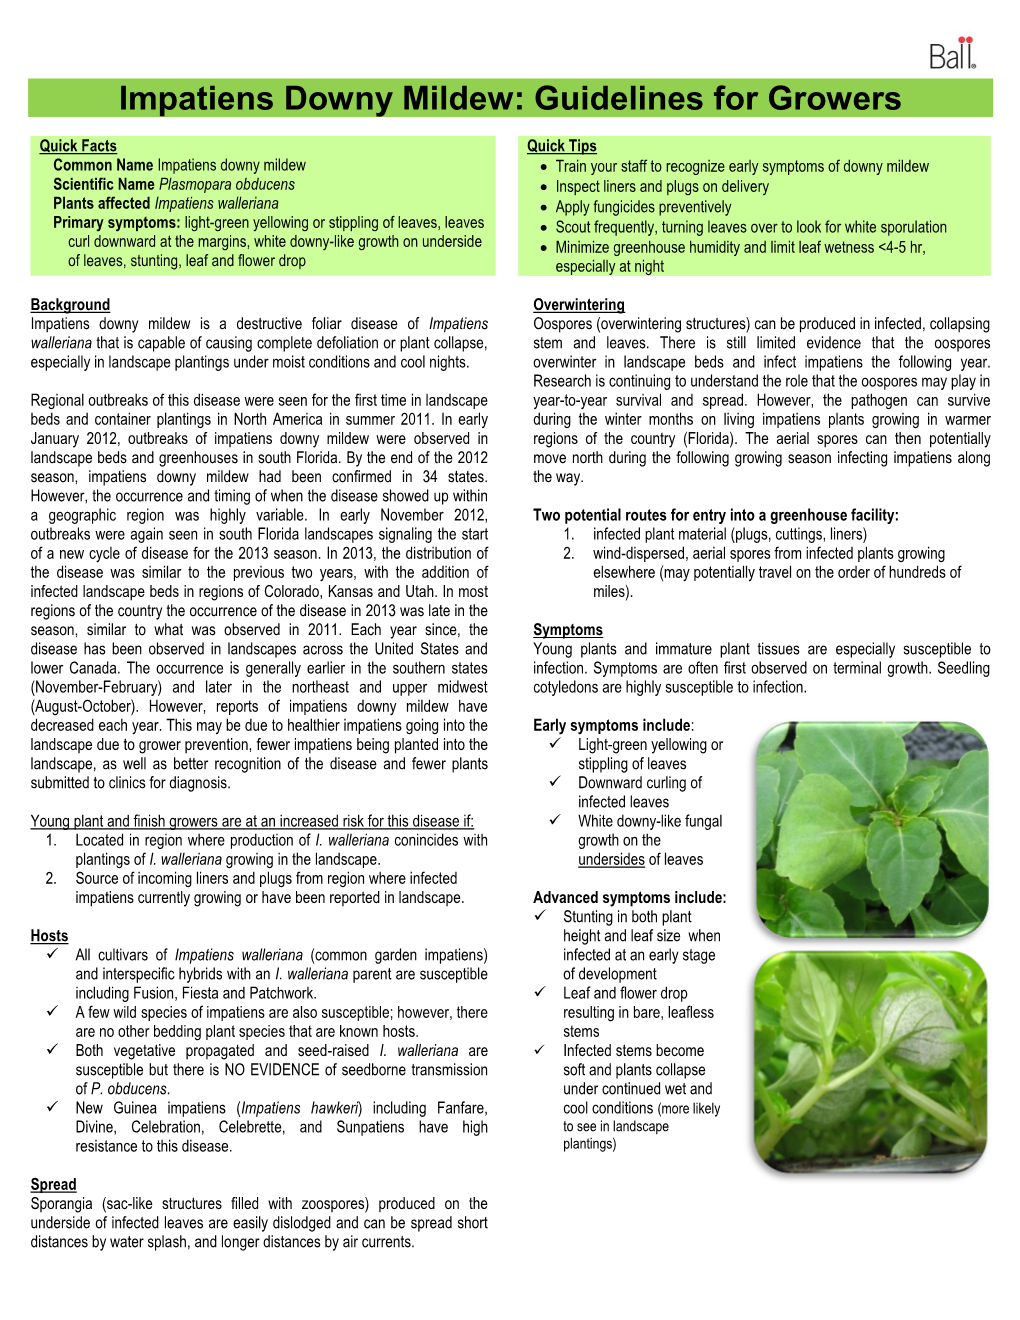 Impatiens Downy Mildew: Guidelines for Growers